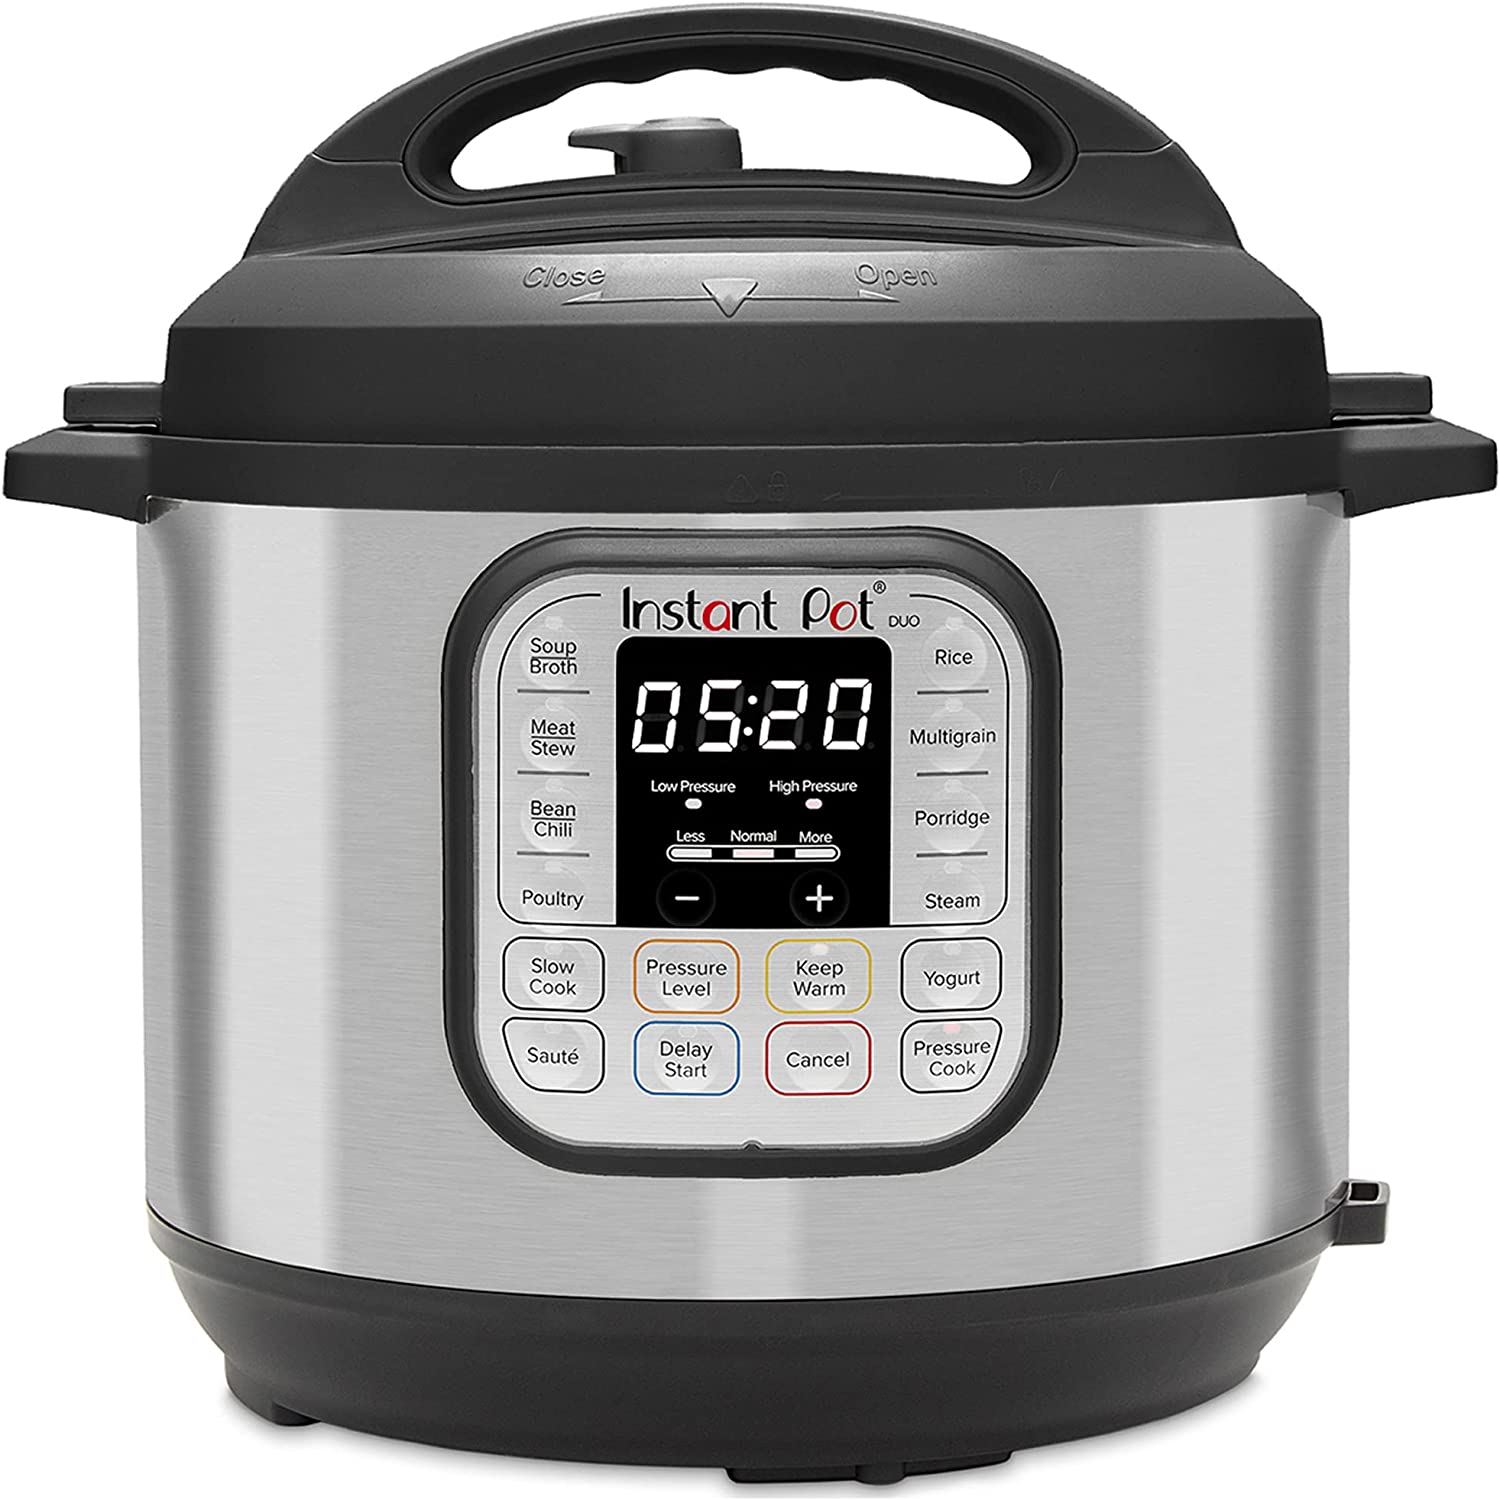 Instant Pot Zest 8 Cup One Touch Rice Cooker, Steamer, Cooks Rice, Grains, Quinoa and Oatmeal, No Pressure Cooking Functionality $74.95